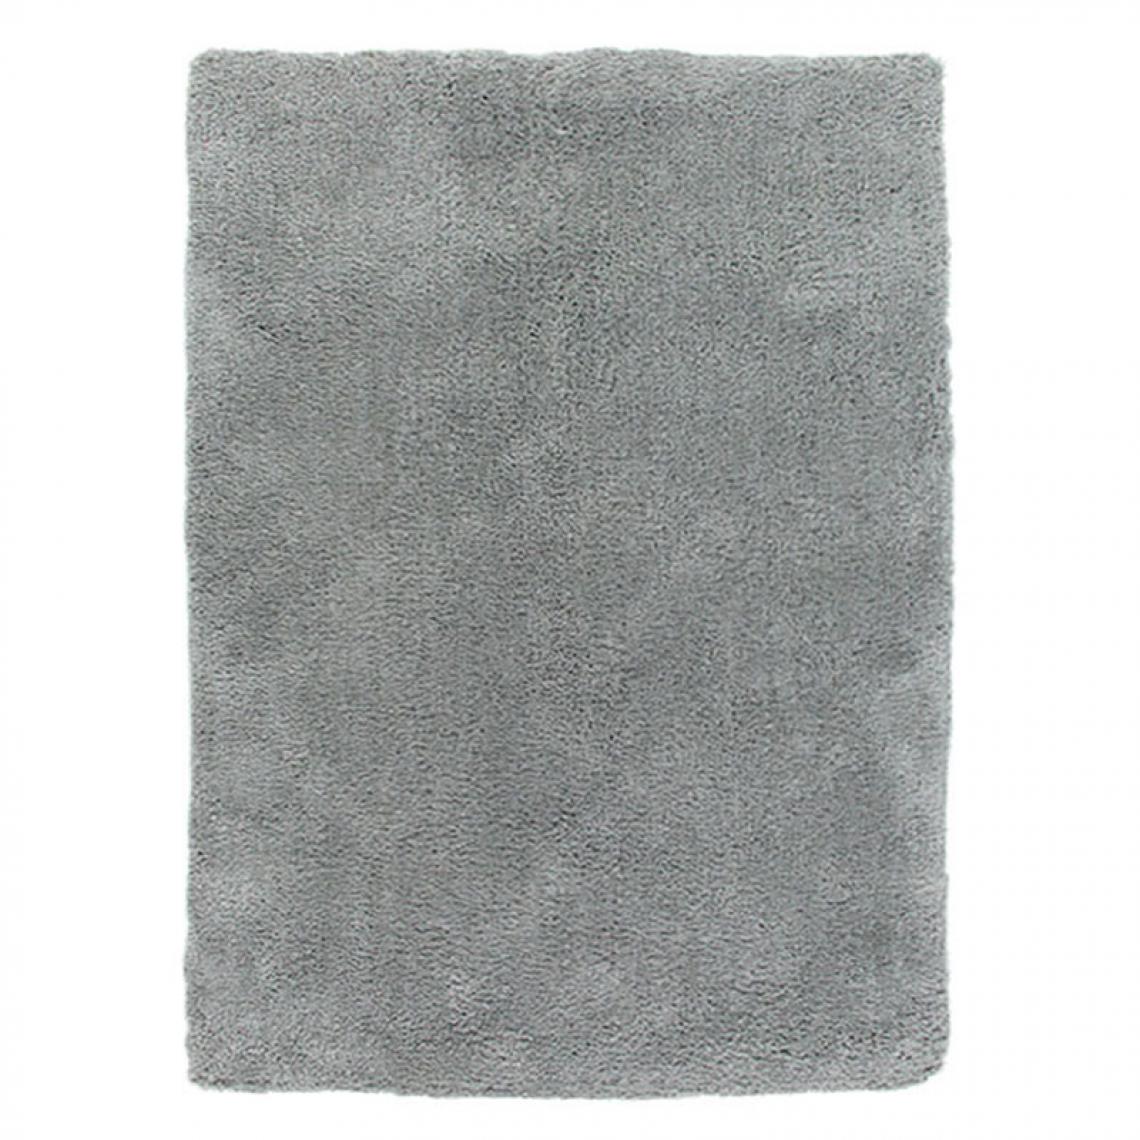 Thedecofactory - COCOON - Tapis shaggy extra doux gris 60x90 - Tapis